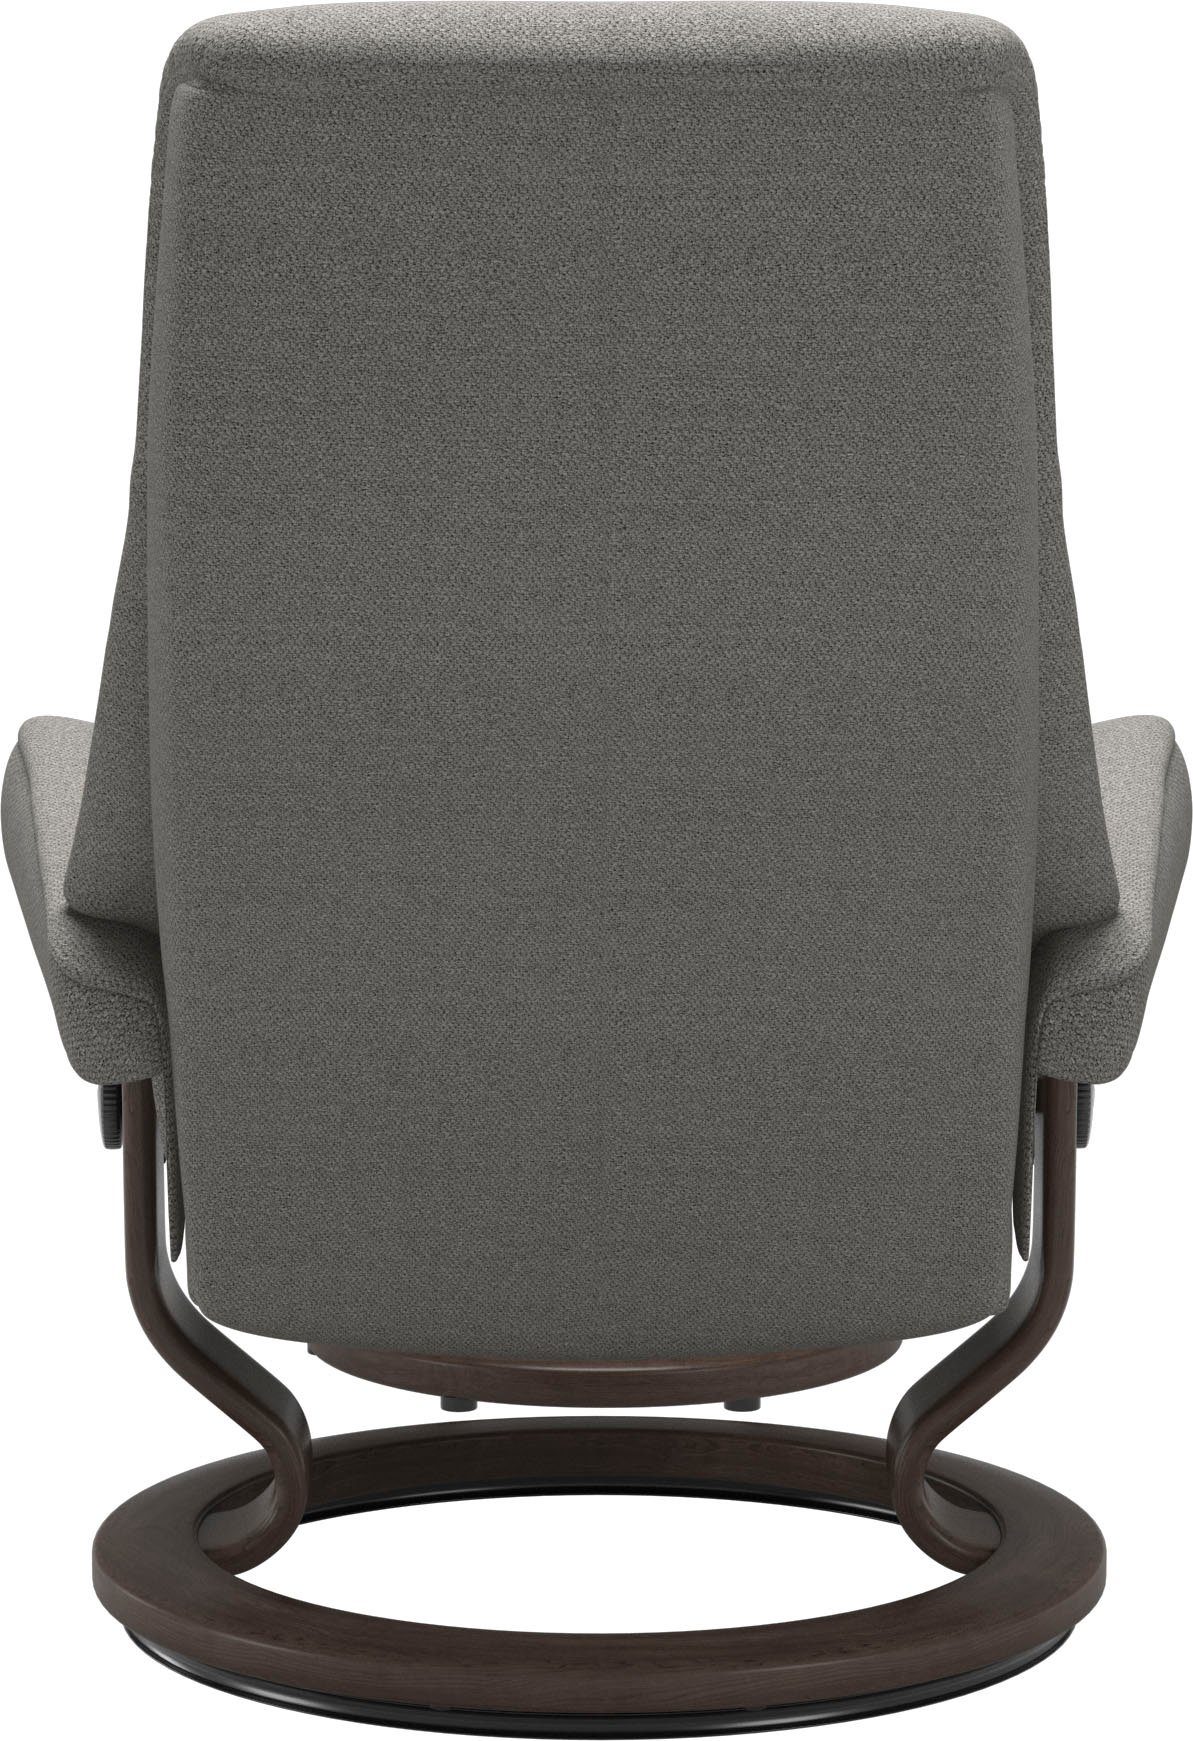 Classic Relaxsessel mit Wenge View, Base, Stressless® L,Gestell Größe